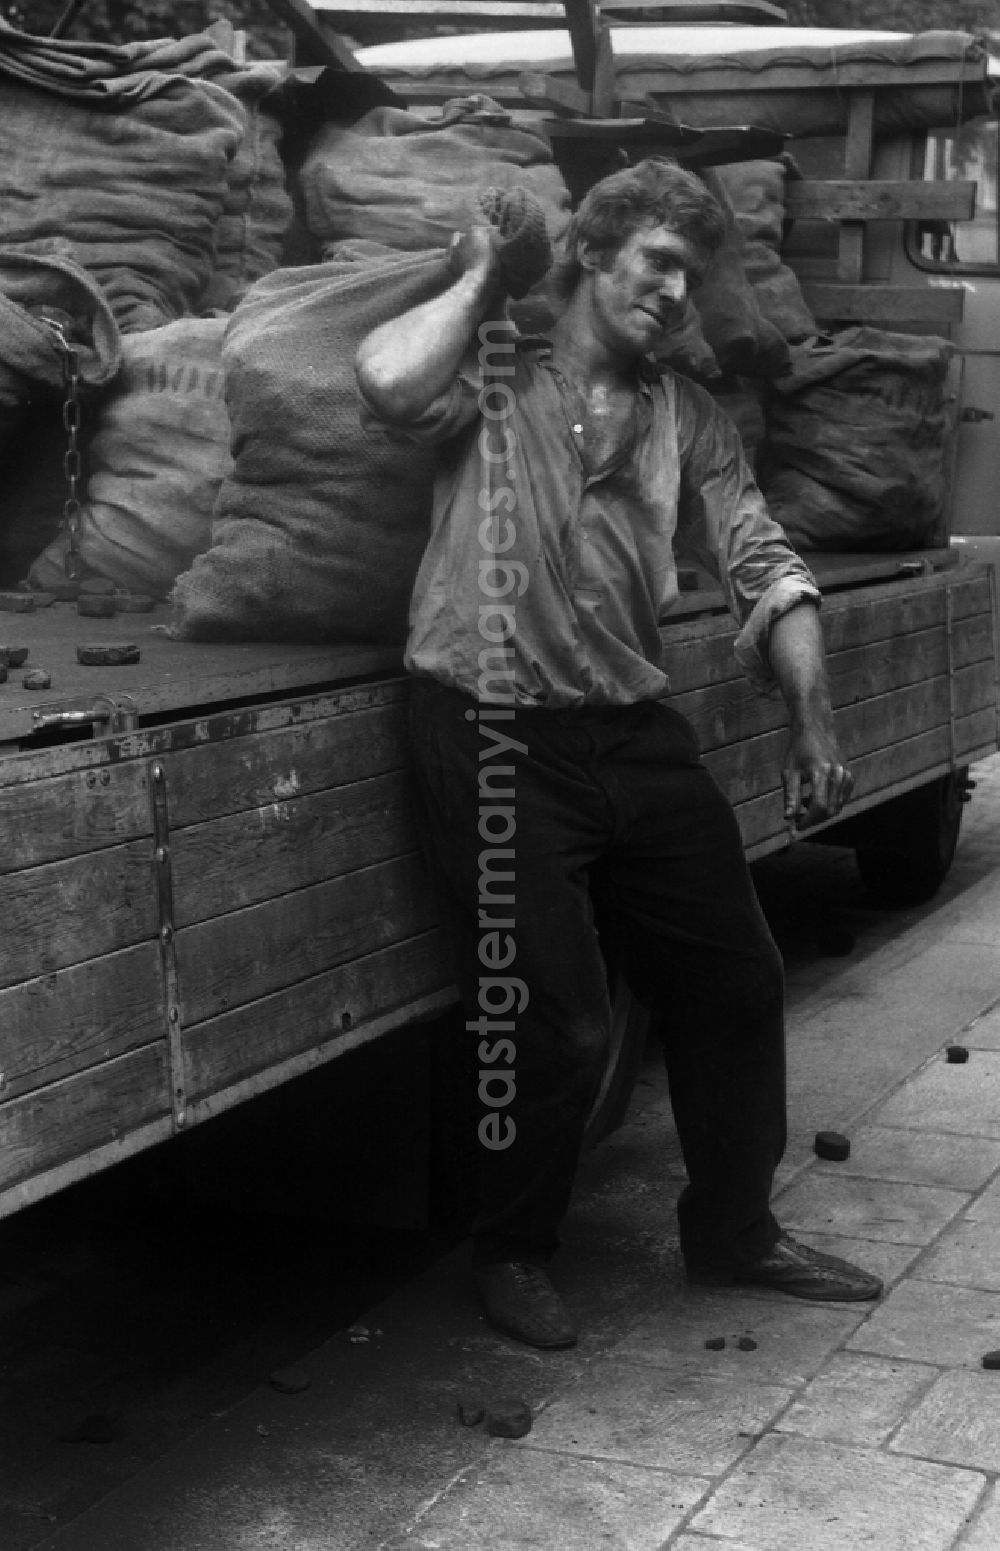 GDR image archive: Berlin - Worker carries a sack of carbon in the district Mitte in Berlin Eastberlin on the territory of the former GDR, German Democratic Republic